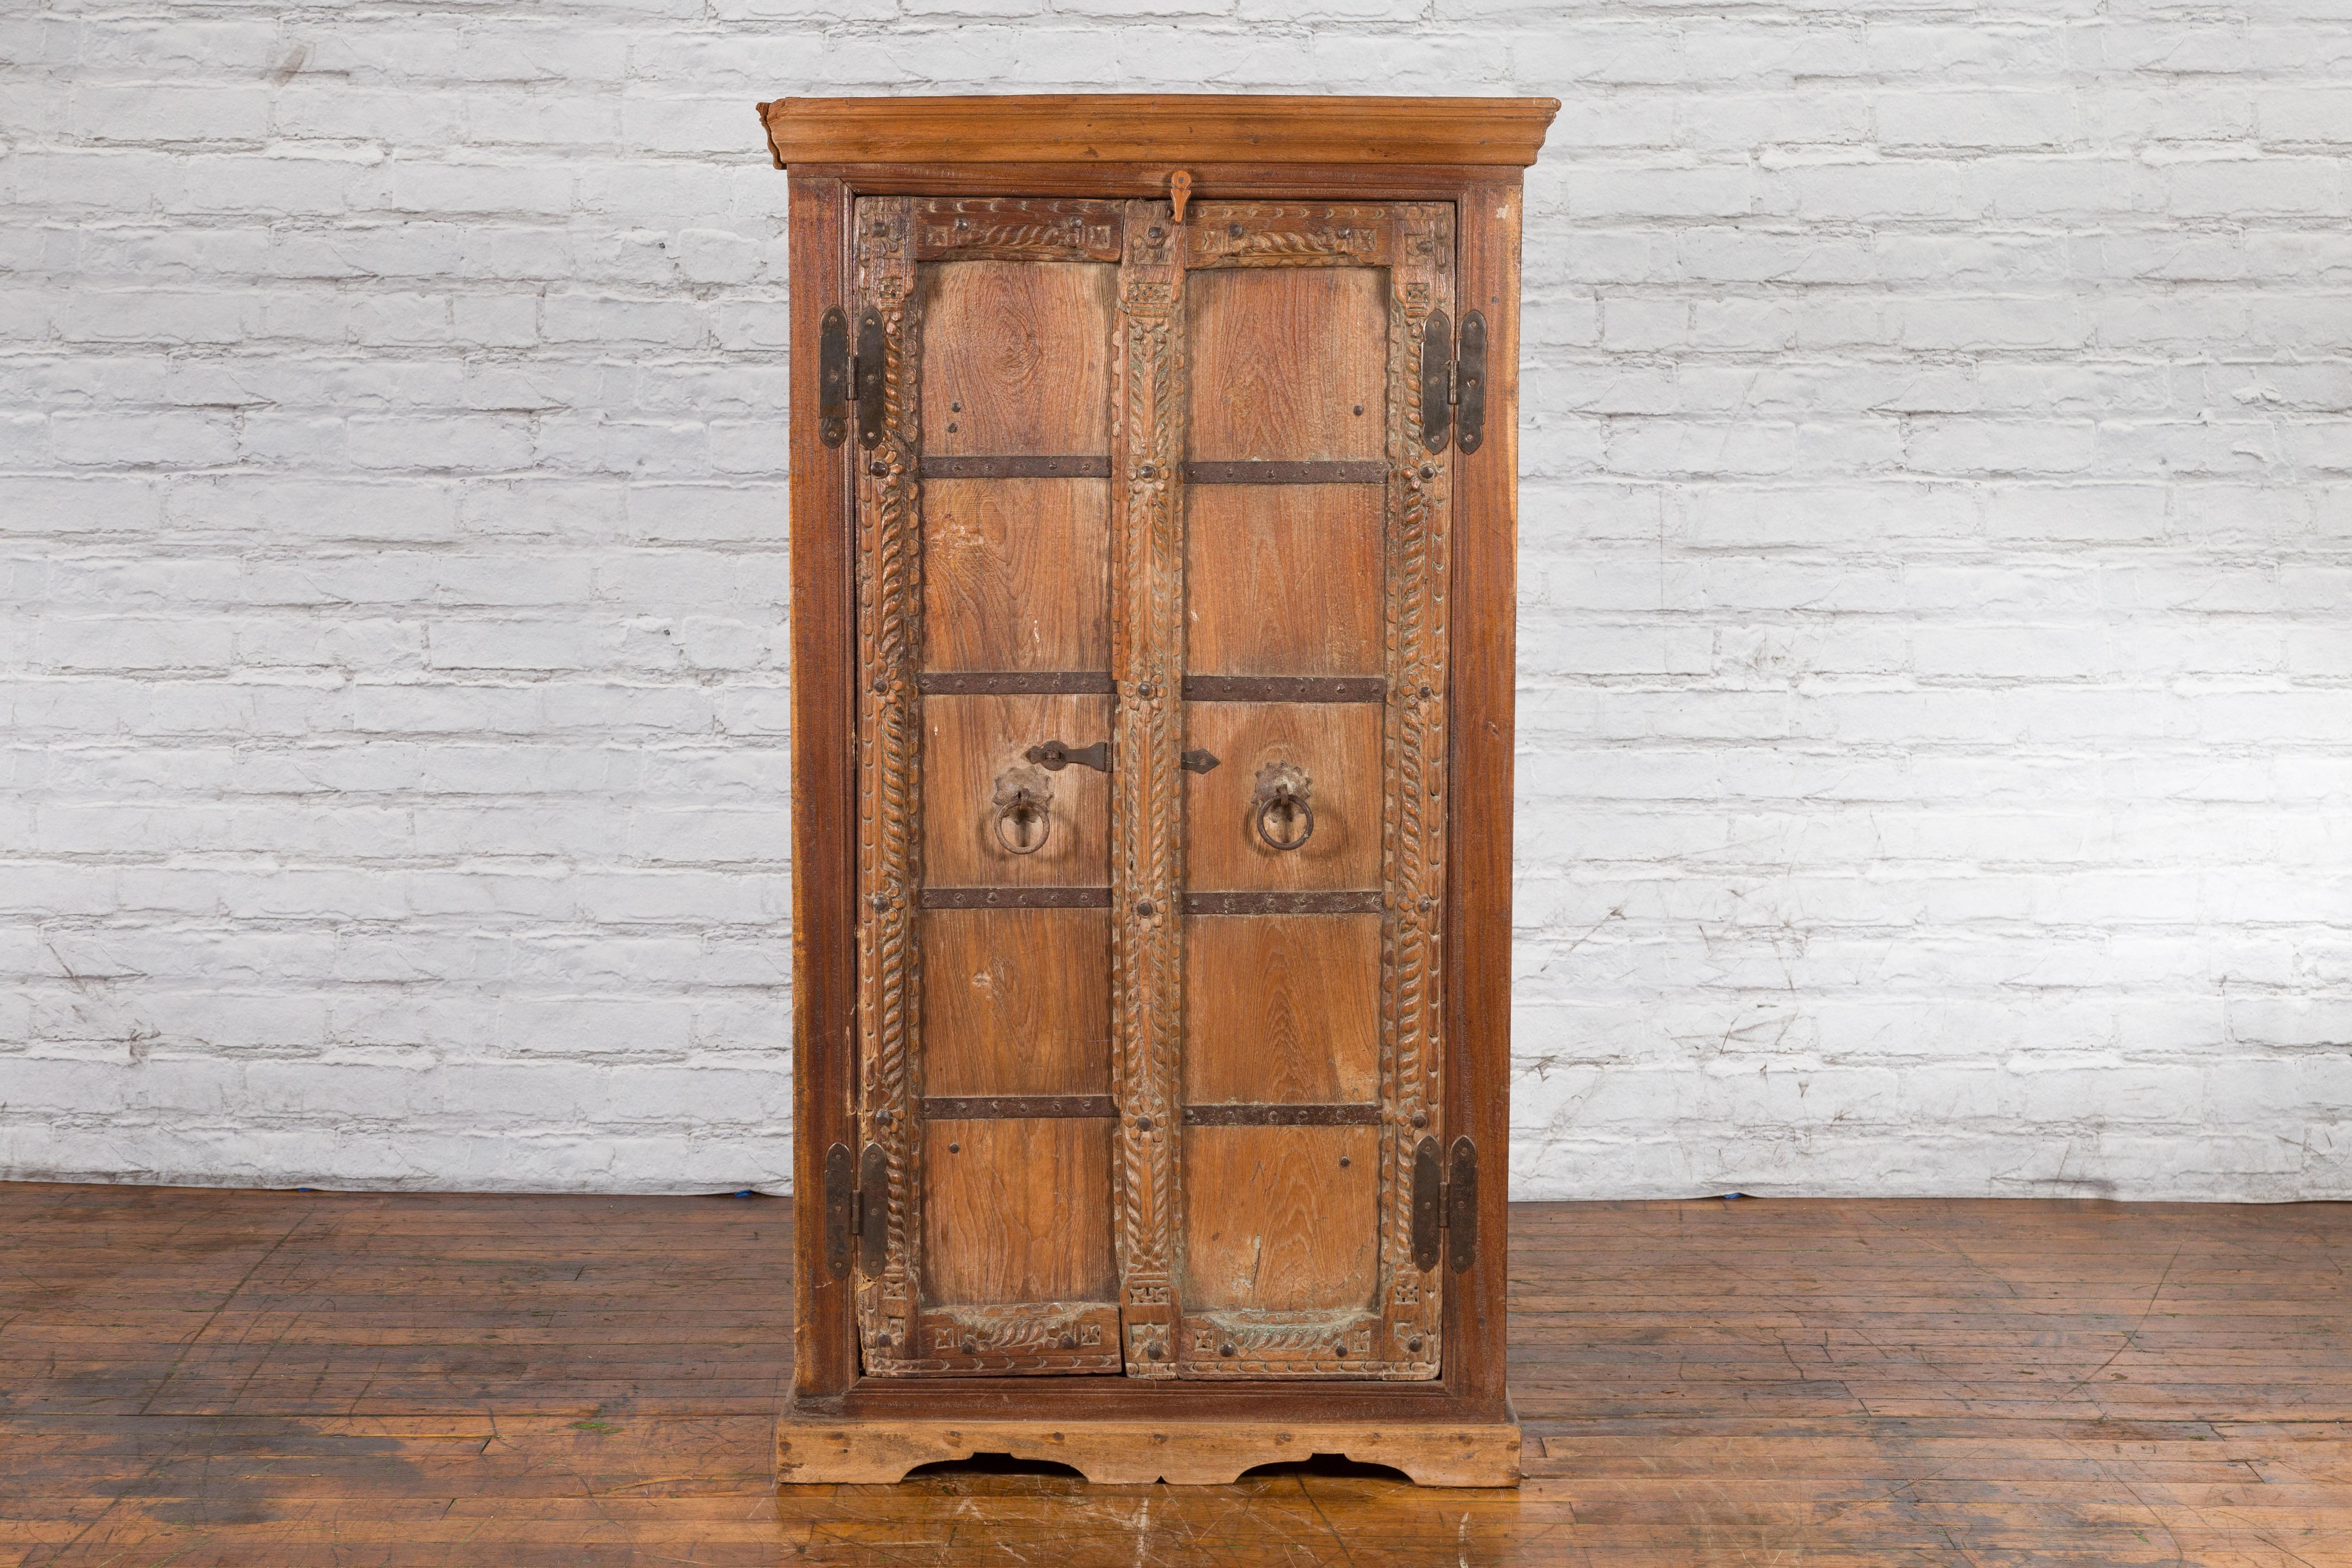 An antique Indian hand-carved wooden armoire from the 19th century with metal braces, twisted molding and floral carvings. Created in India during the 19th century, this wooden armoire features a molded cornice sitting above a set of double doors,